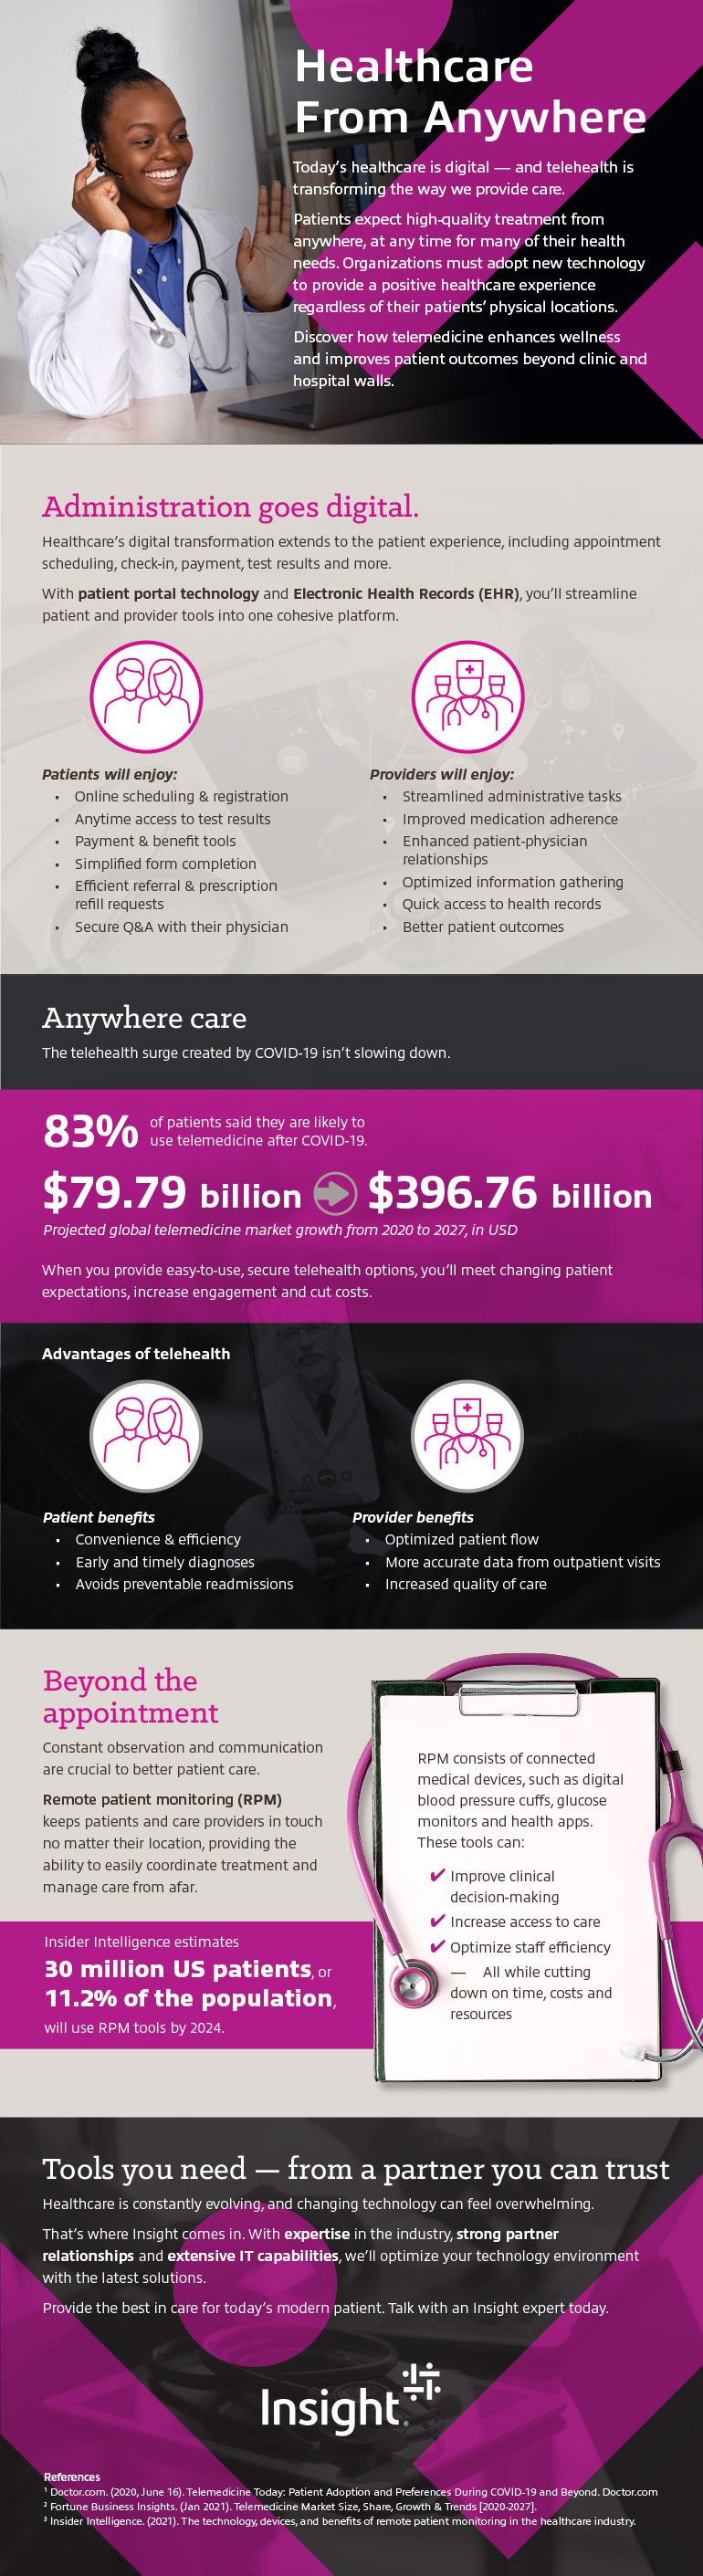 Healthcare From Anywhere infographic as transcribed below